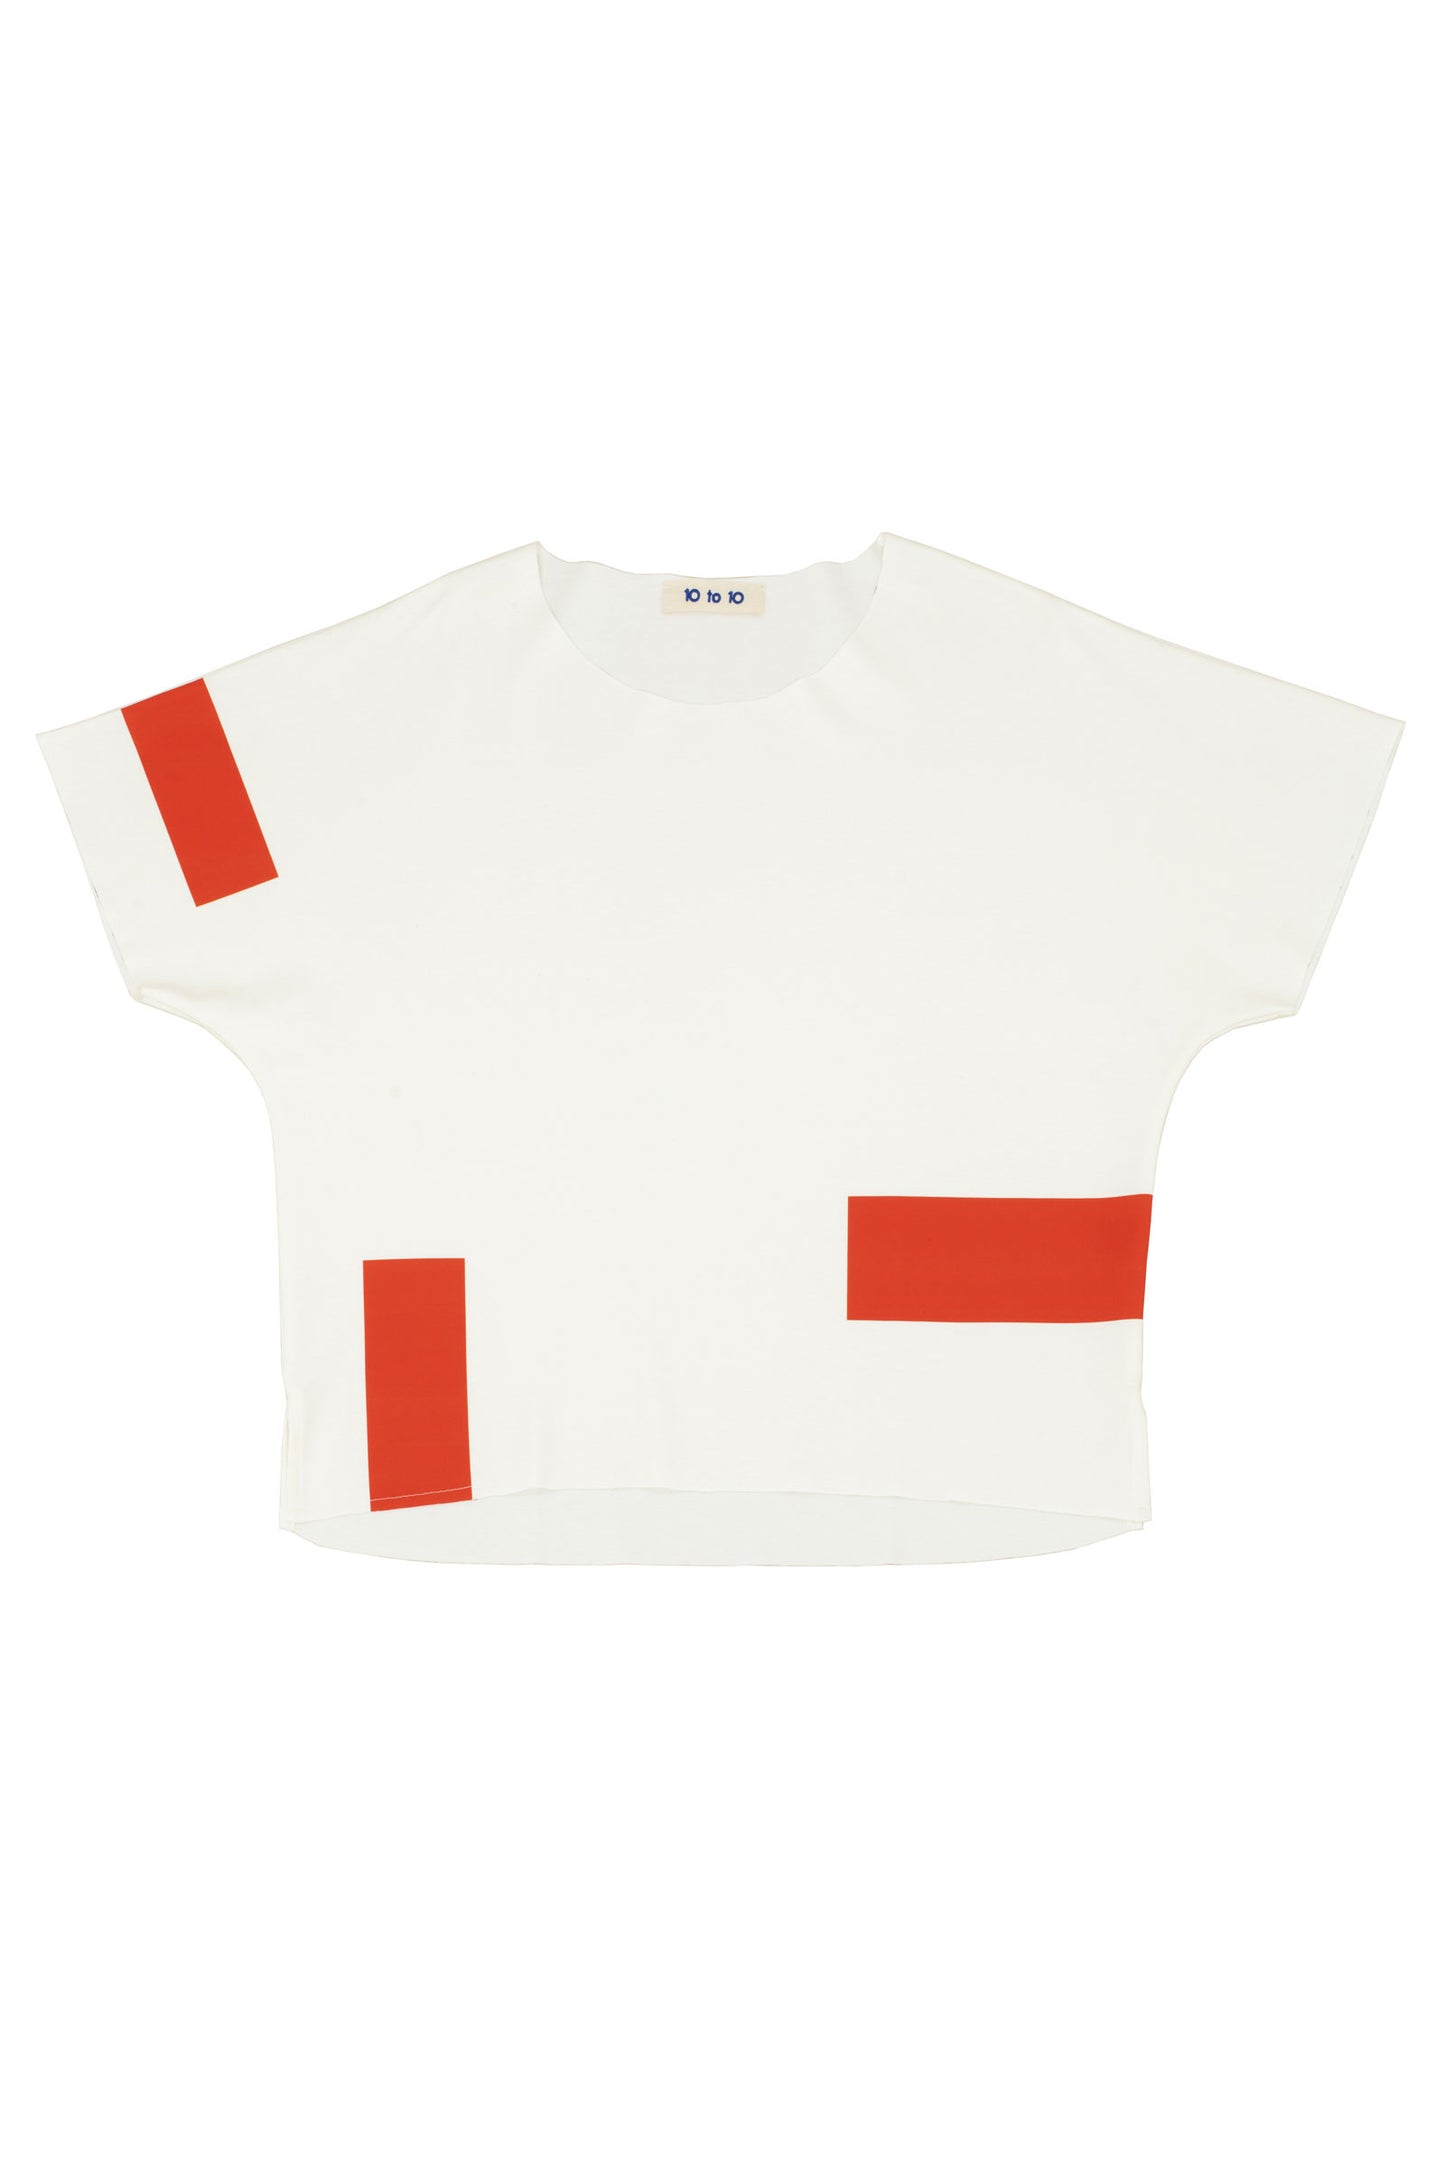 10 to 10 Off-White T-Shirt with red rectangles pattern, Product Pic